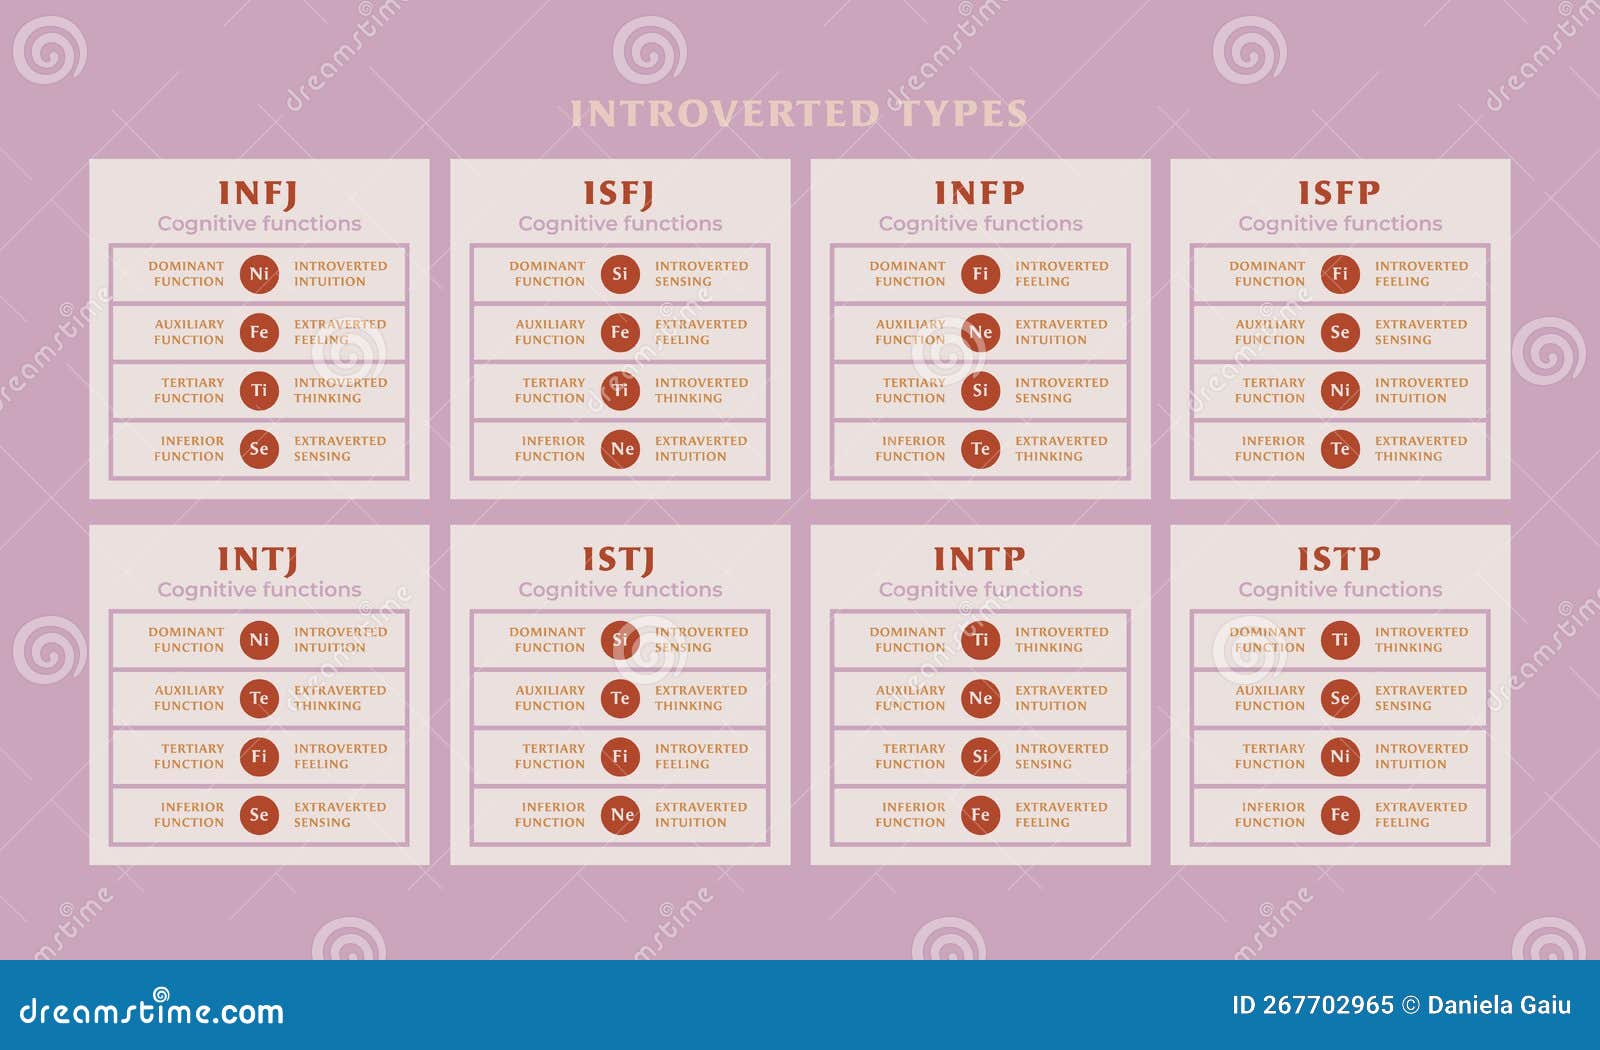 mbti cognitive functions of introverted types